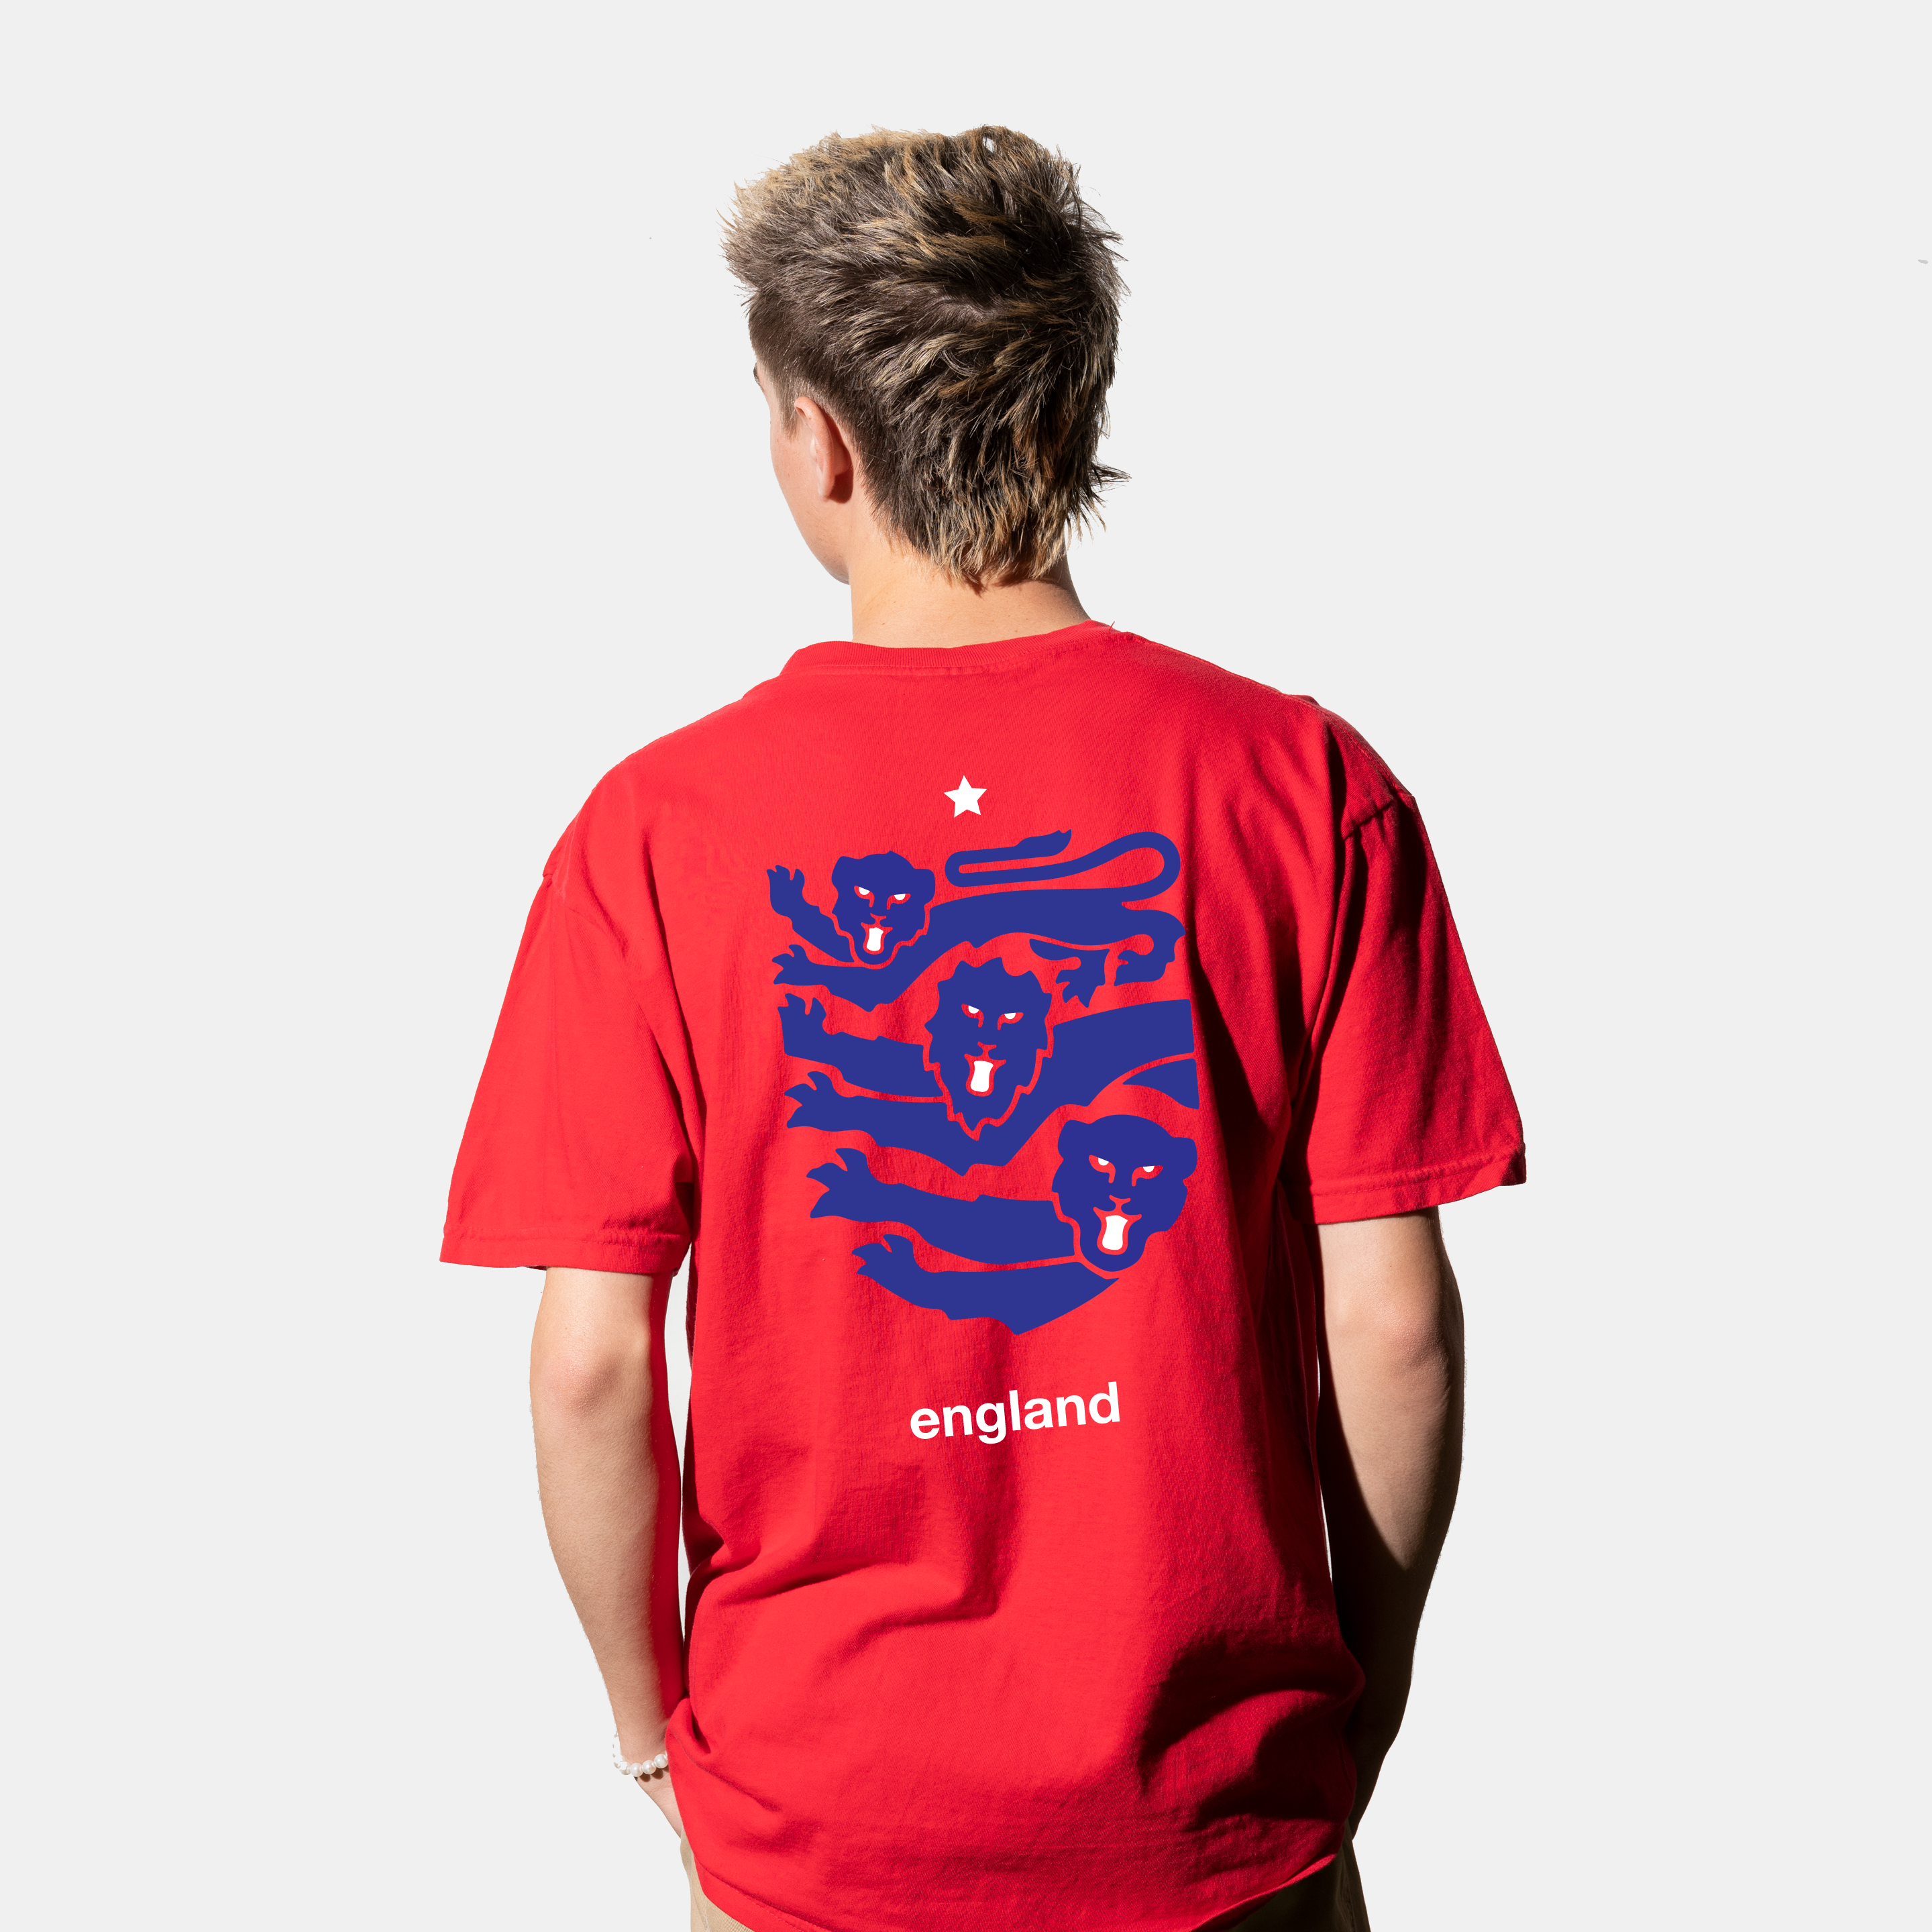 "Unofficial" England Tee